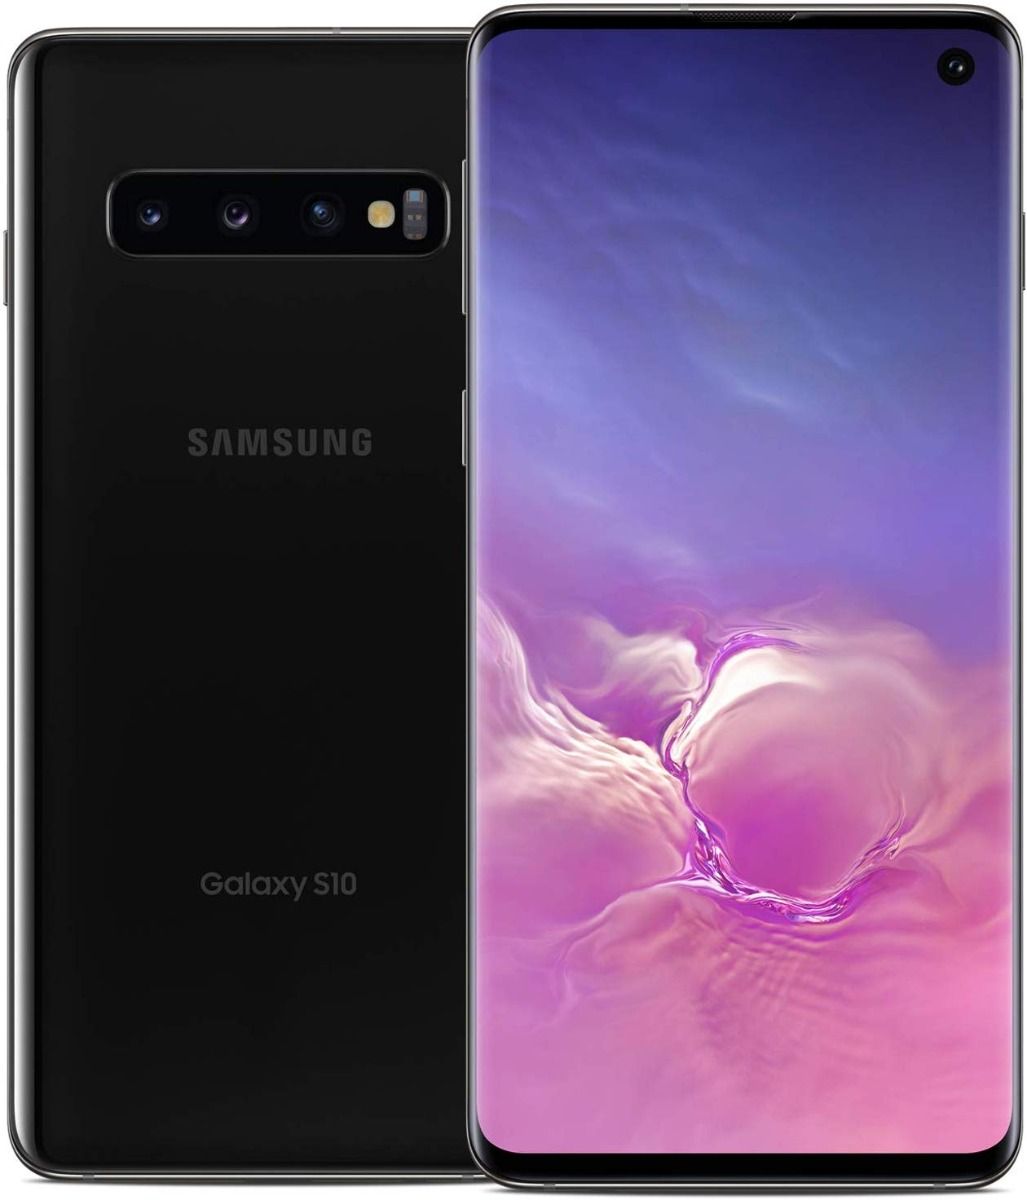 Samsung Galaxy S10 512GB Prism Black (Excellent) With Case, Glass Screen Protector & Shipping